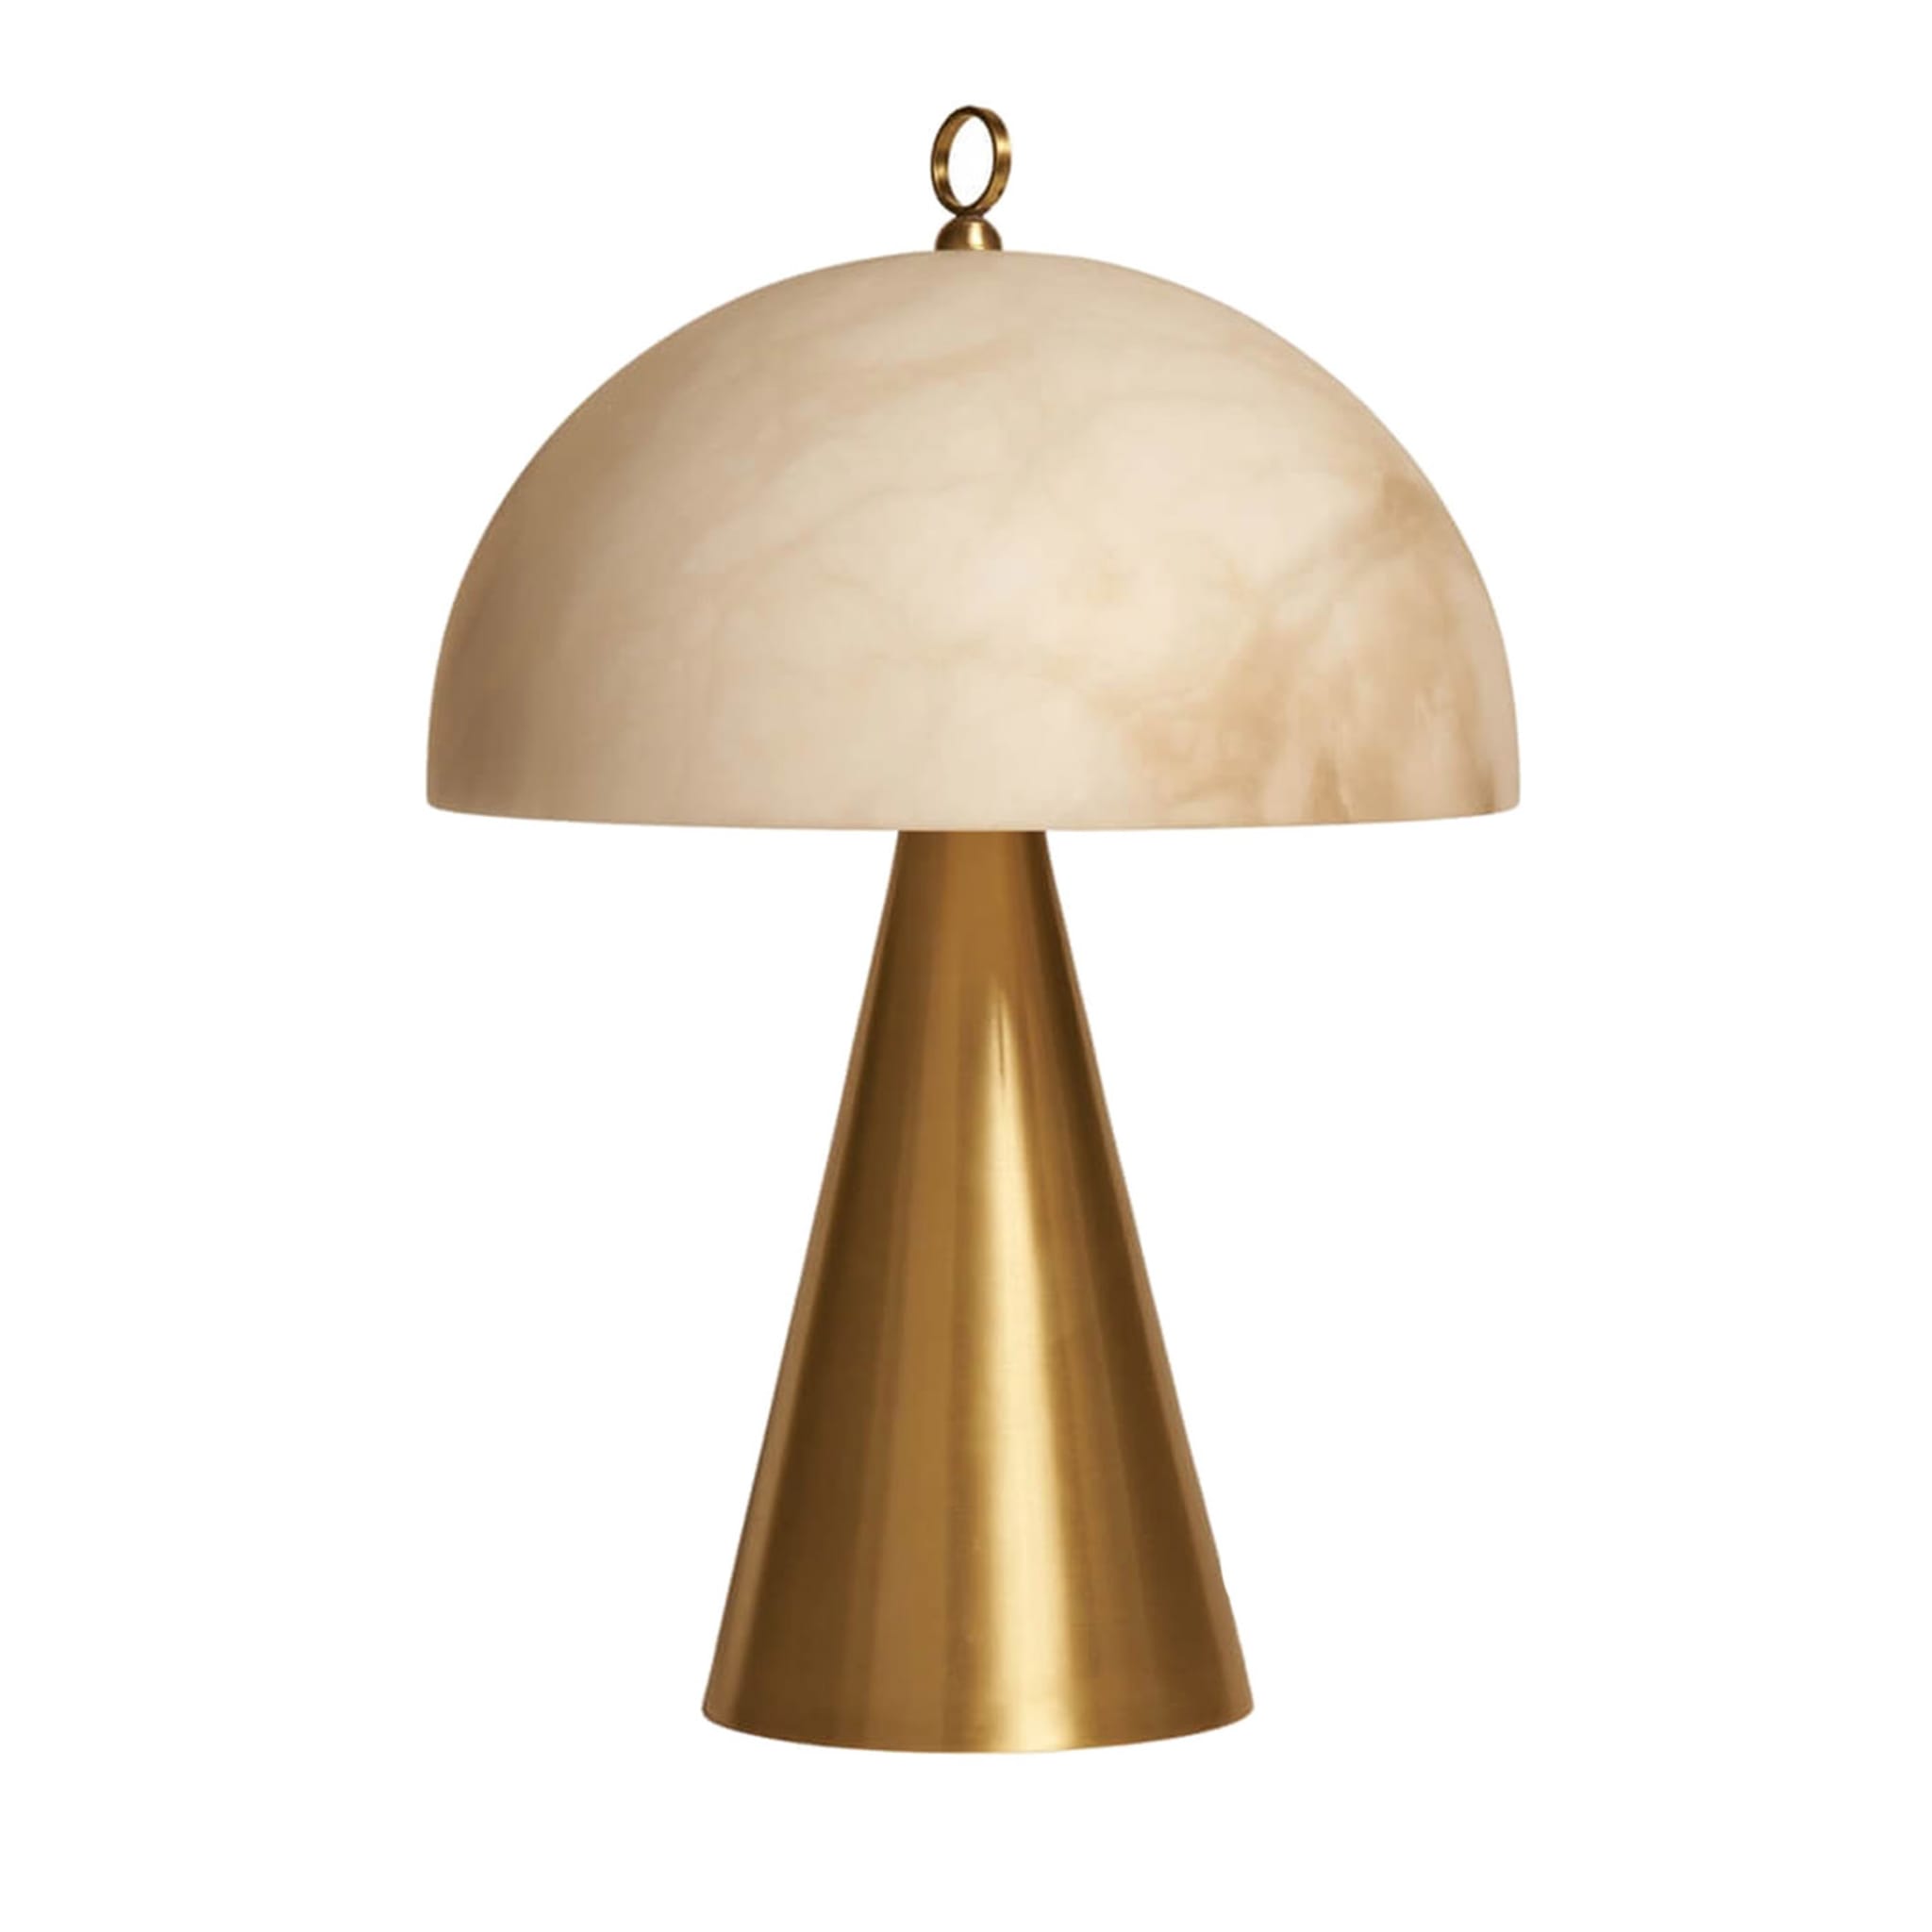 "Funghetto" Table Lamp in Satin Brass A - Main view